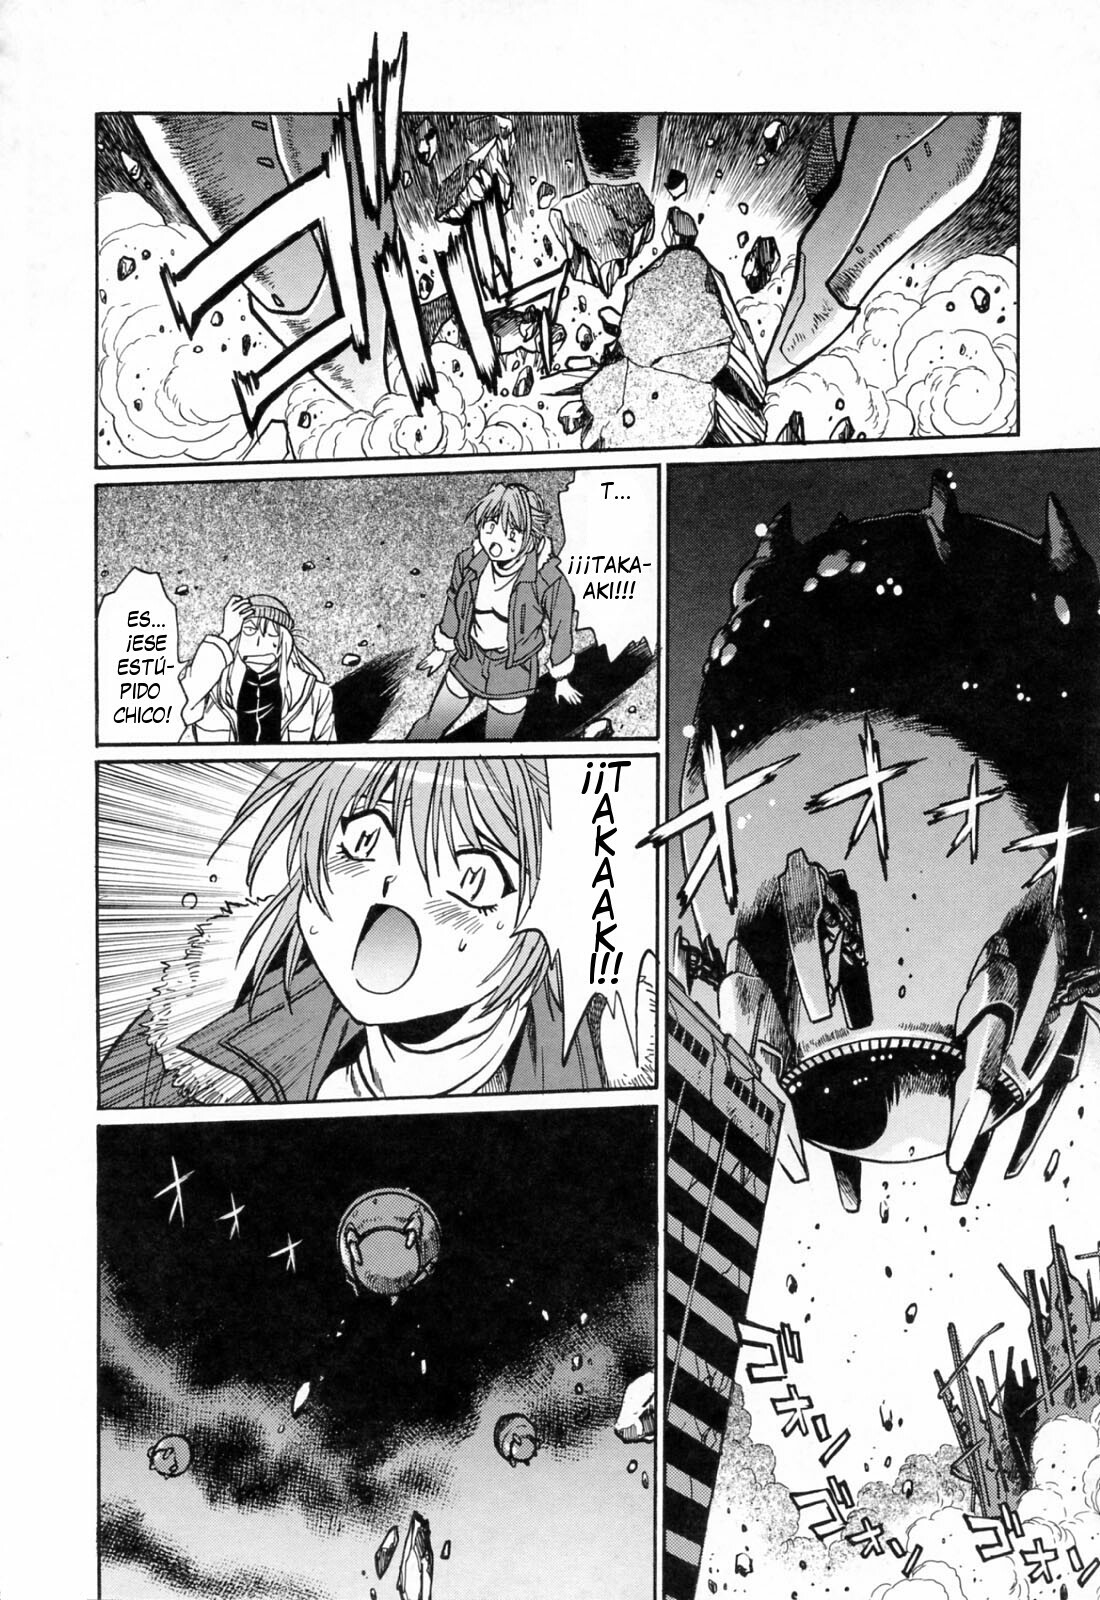 [Manabe Jouji] Tail Chaser 3 [Spanish] [CHMOD -R 777] page 50 full